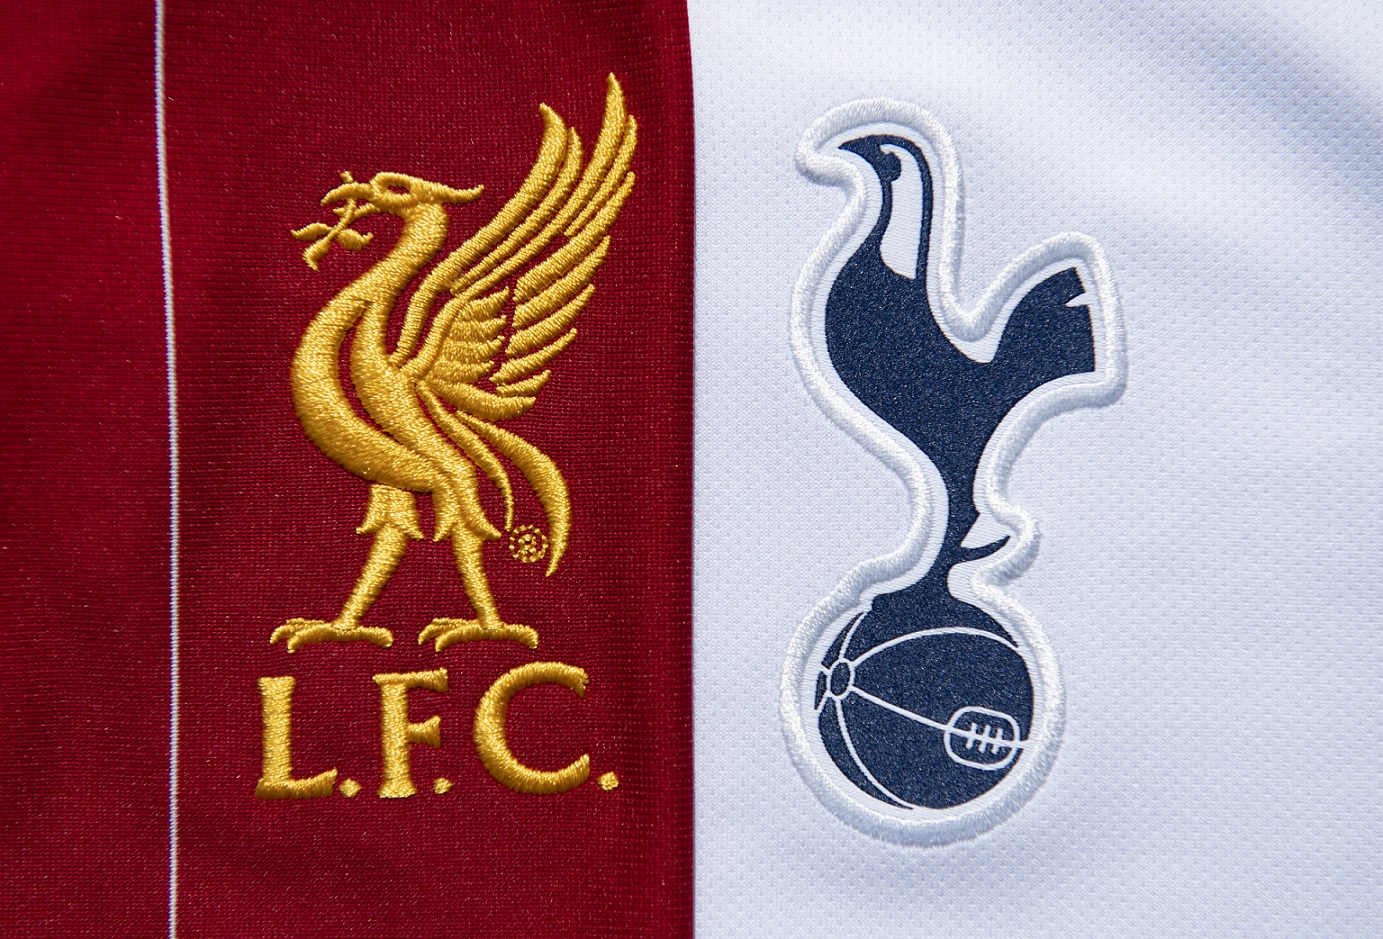 “We are in the race” – Move for Tottenham outcast could affect Liverpool manager chase